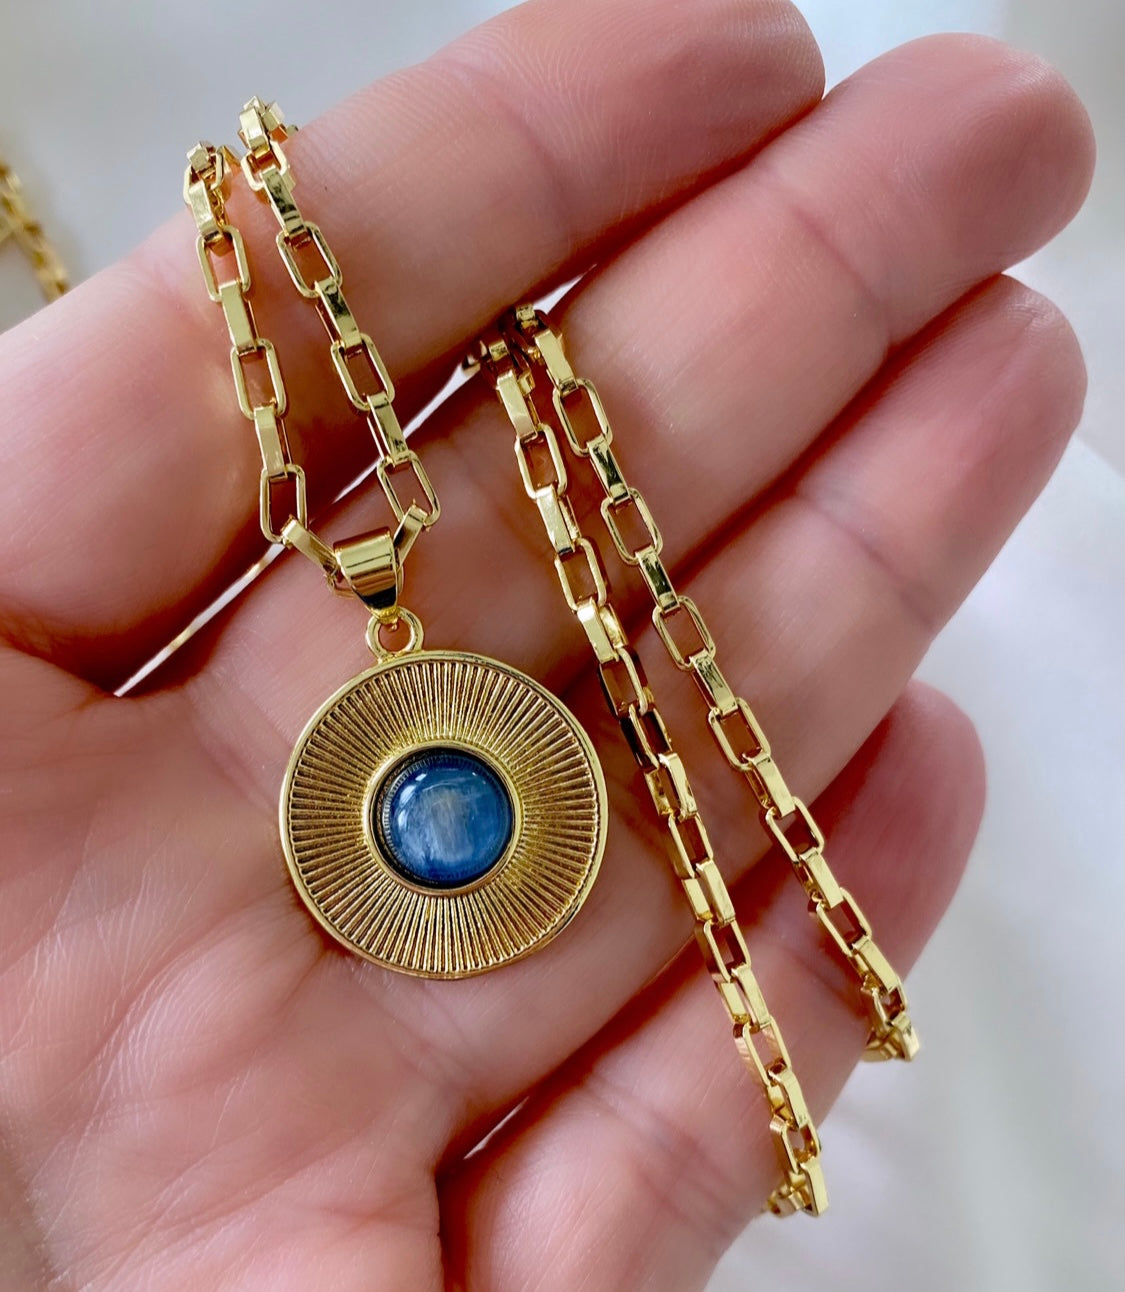 Vintage Style Blue Tiger's Eye Medallion Necklace - Gold Filled Chain - Thick Paperclip Chain